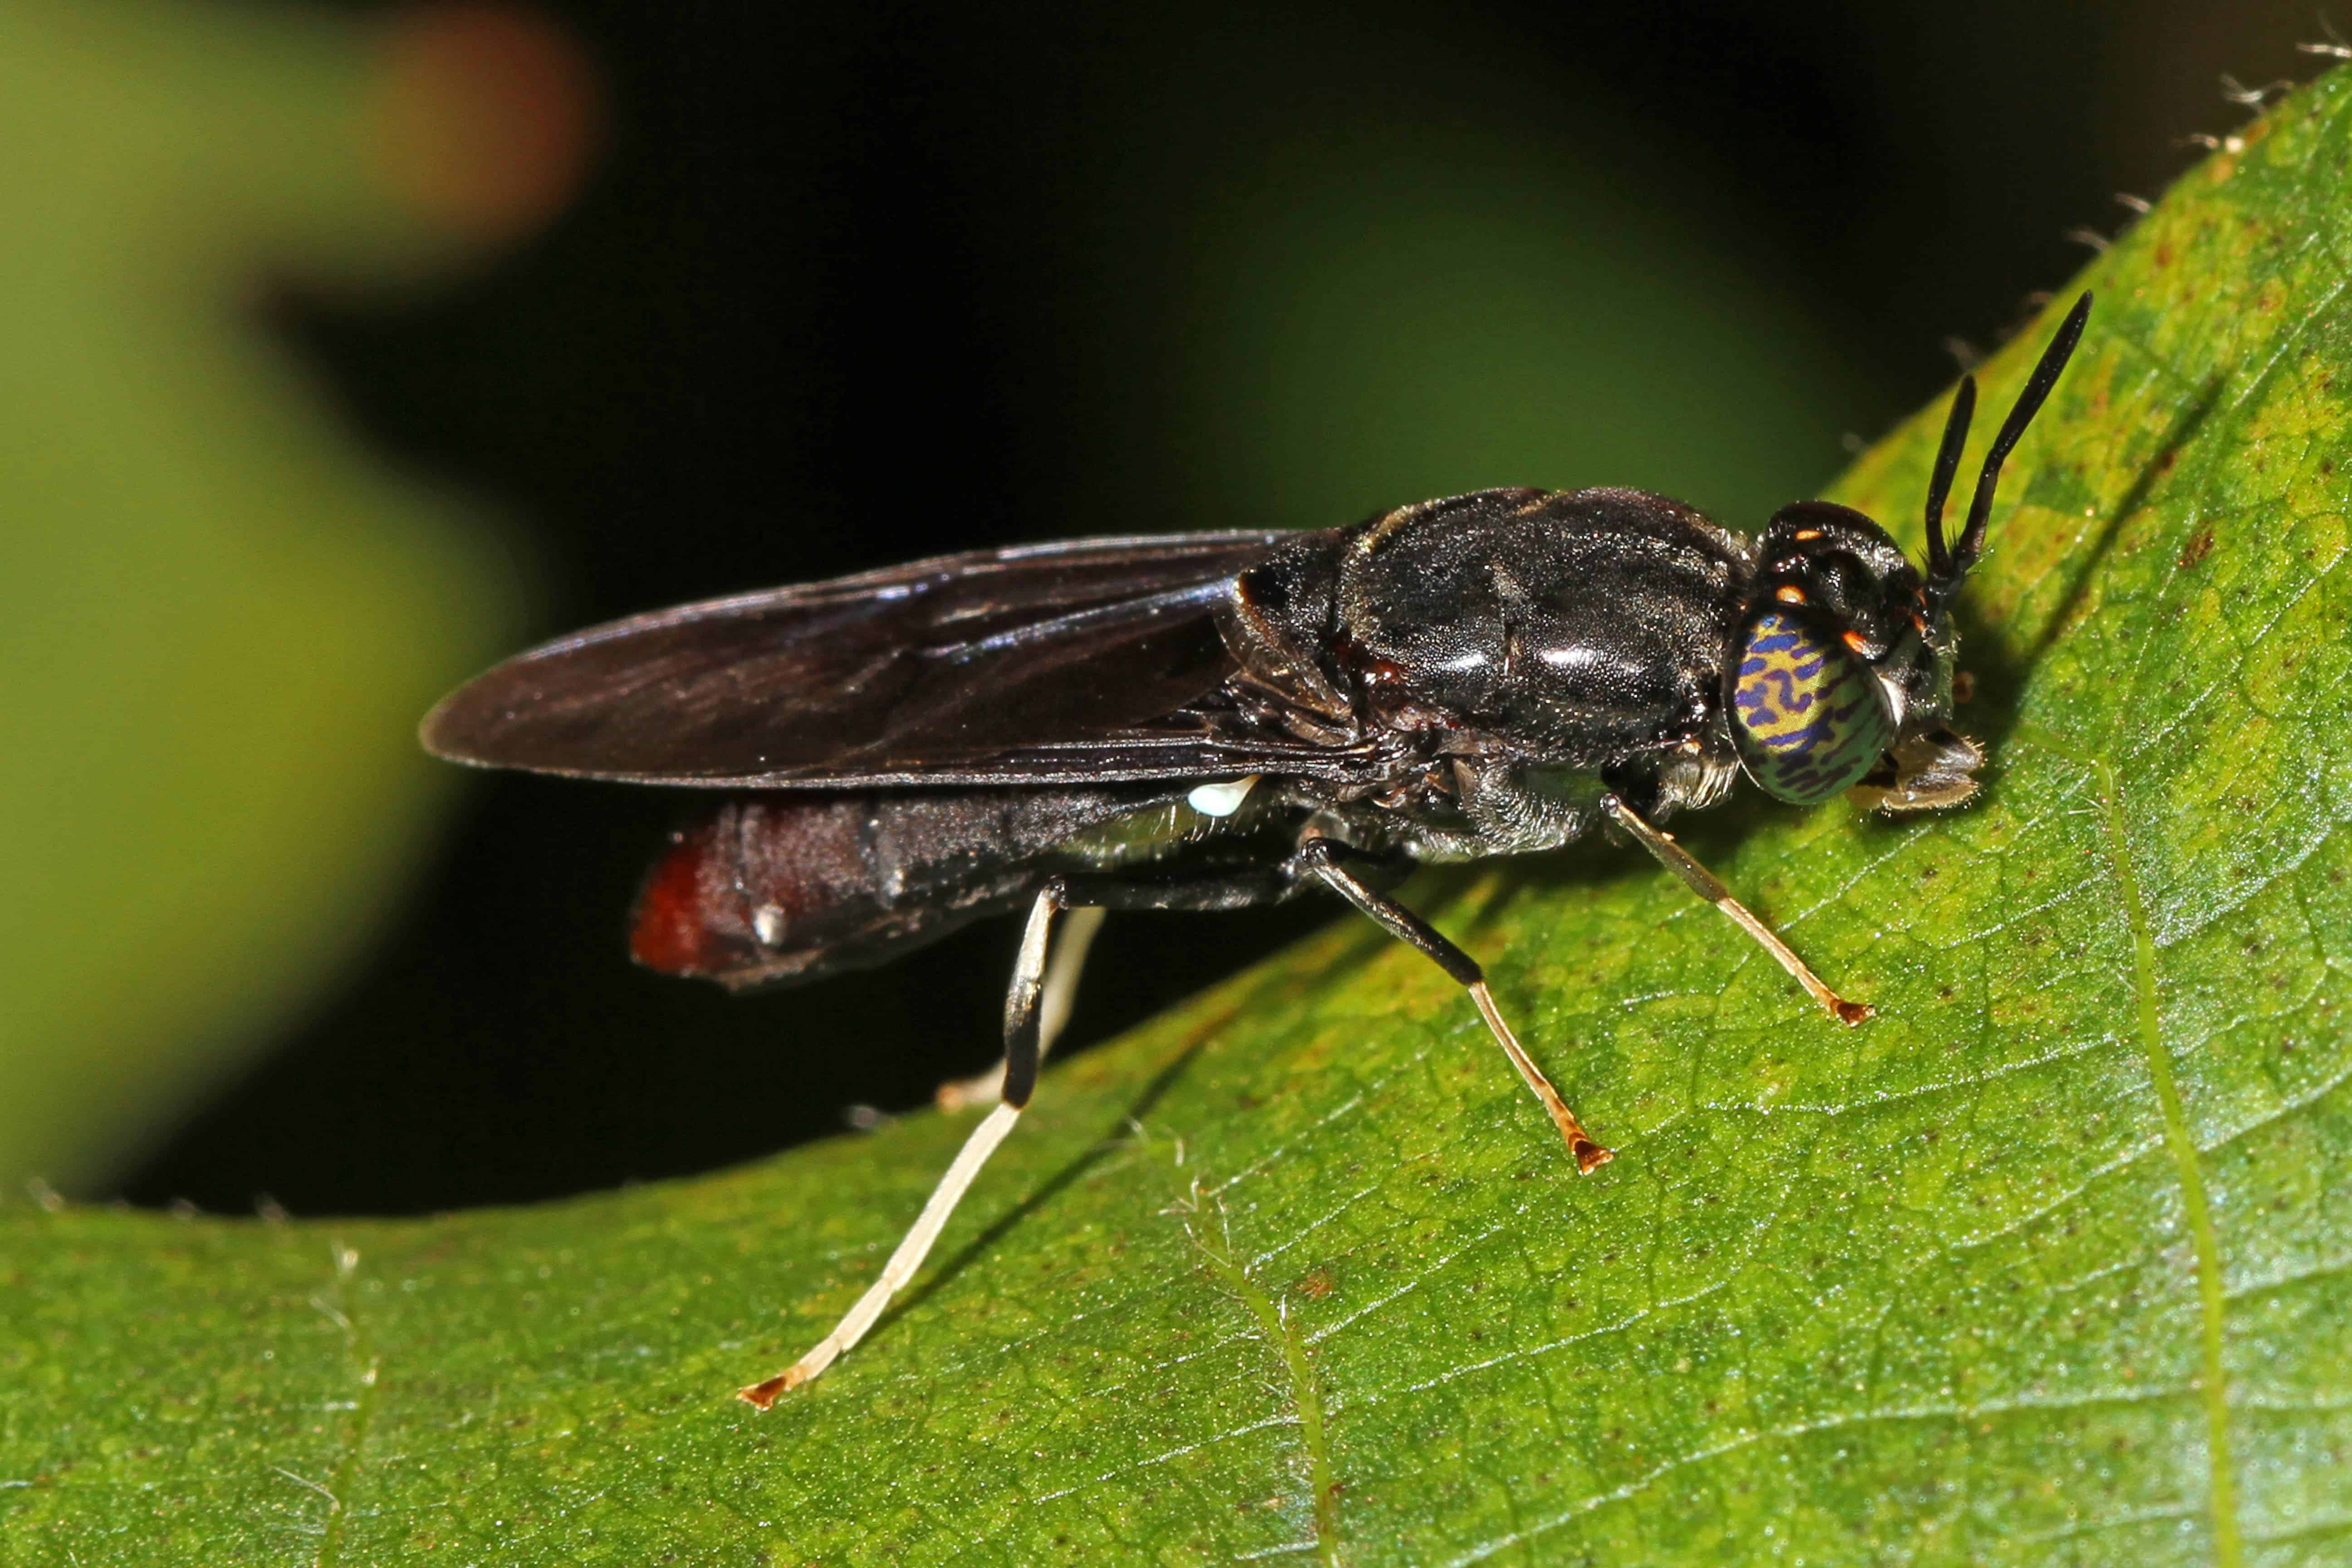 The Black Soldier Fly -- Hermetia illucens. Image credits: Judy Gallagher.